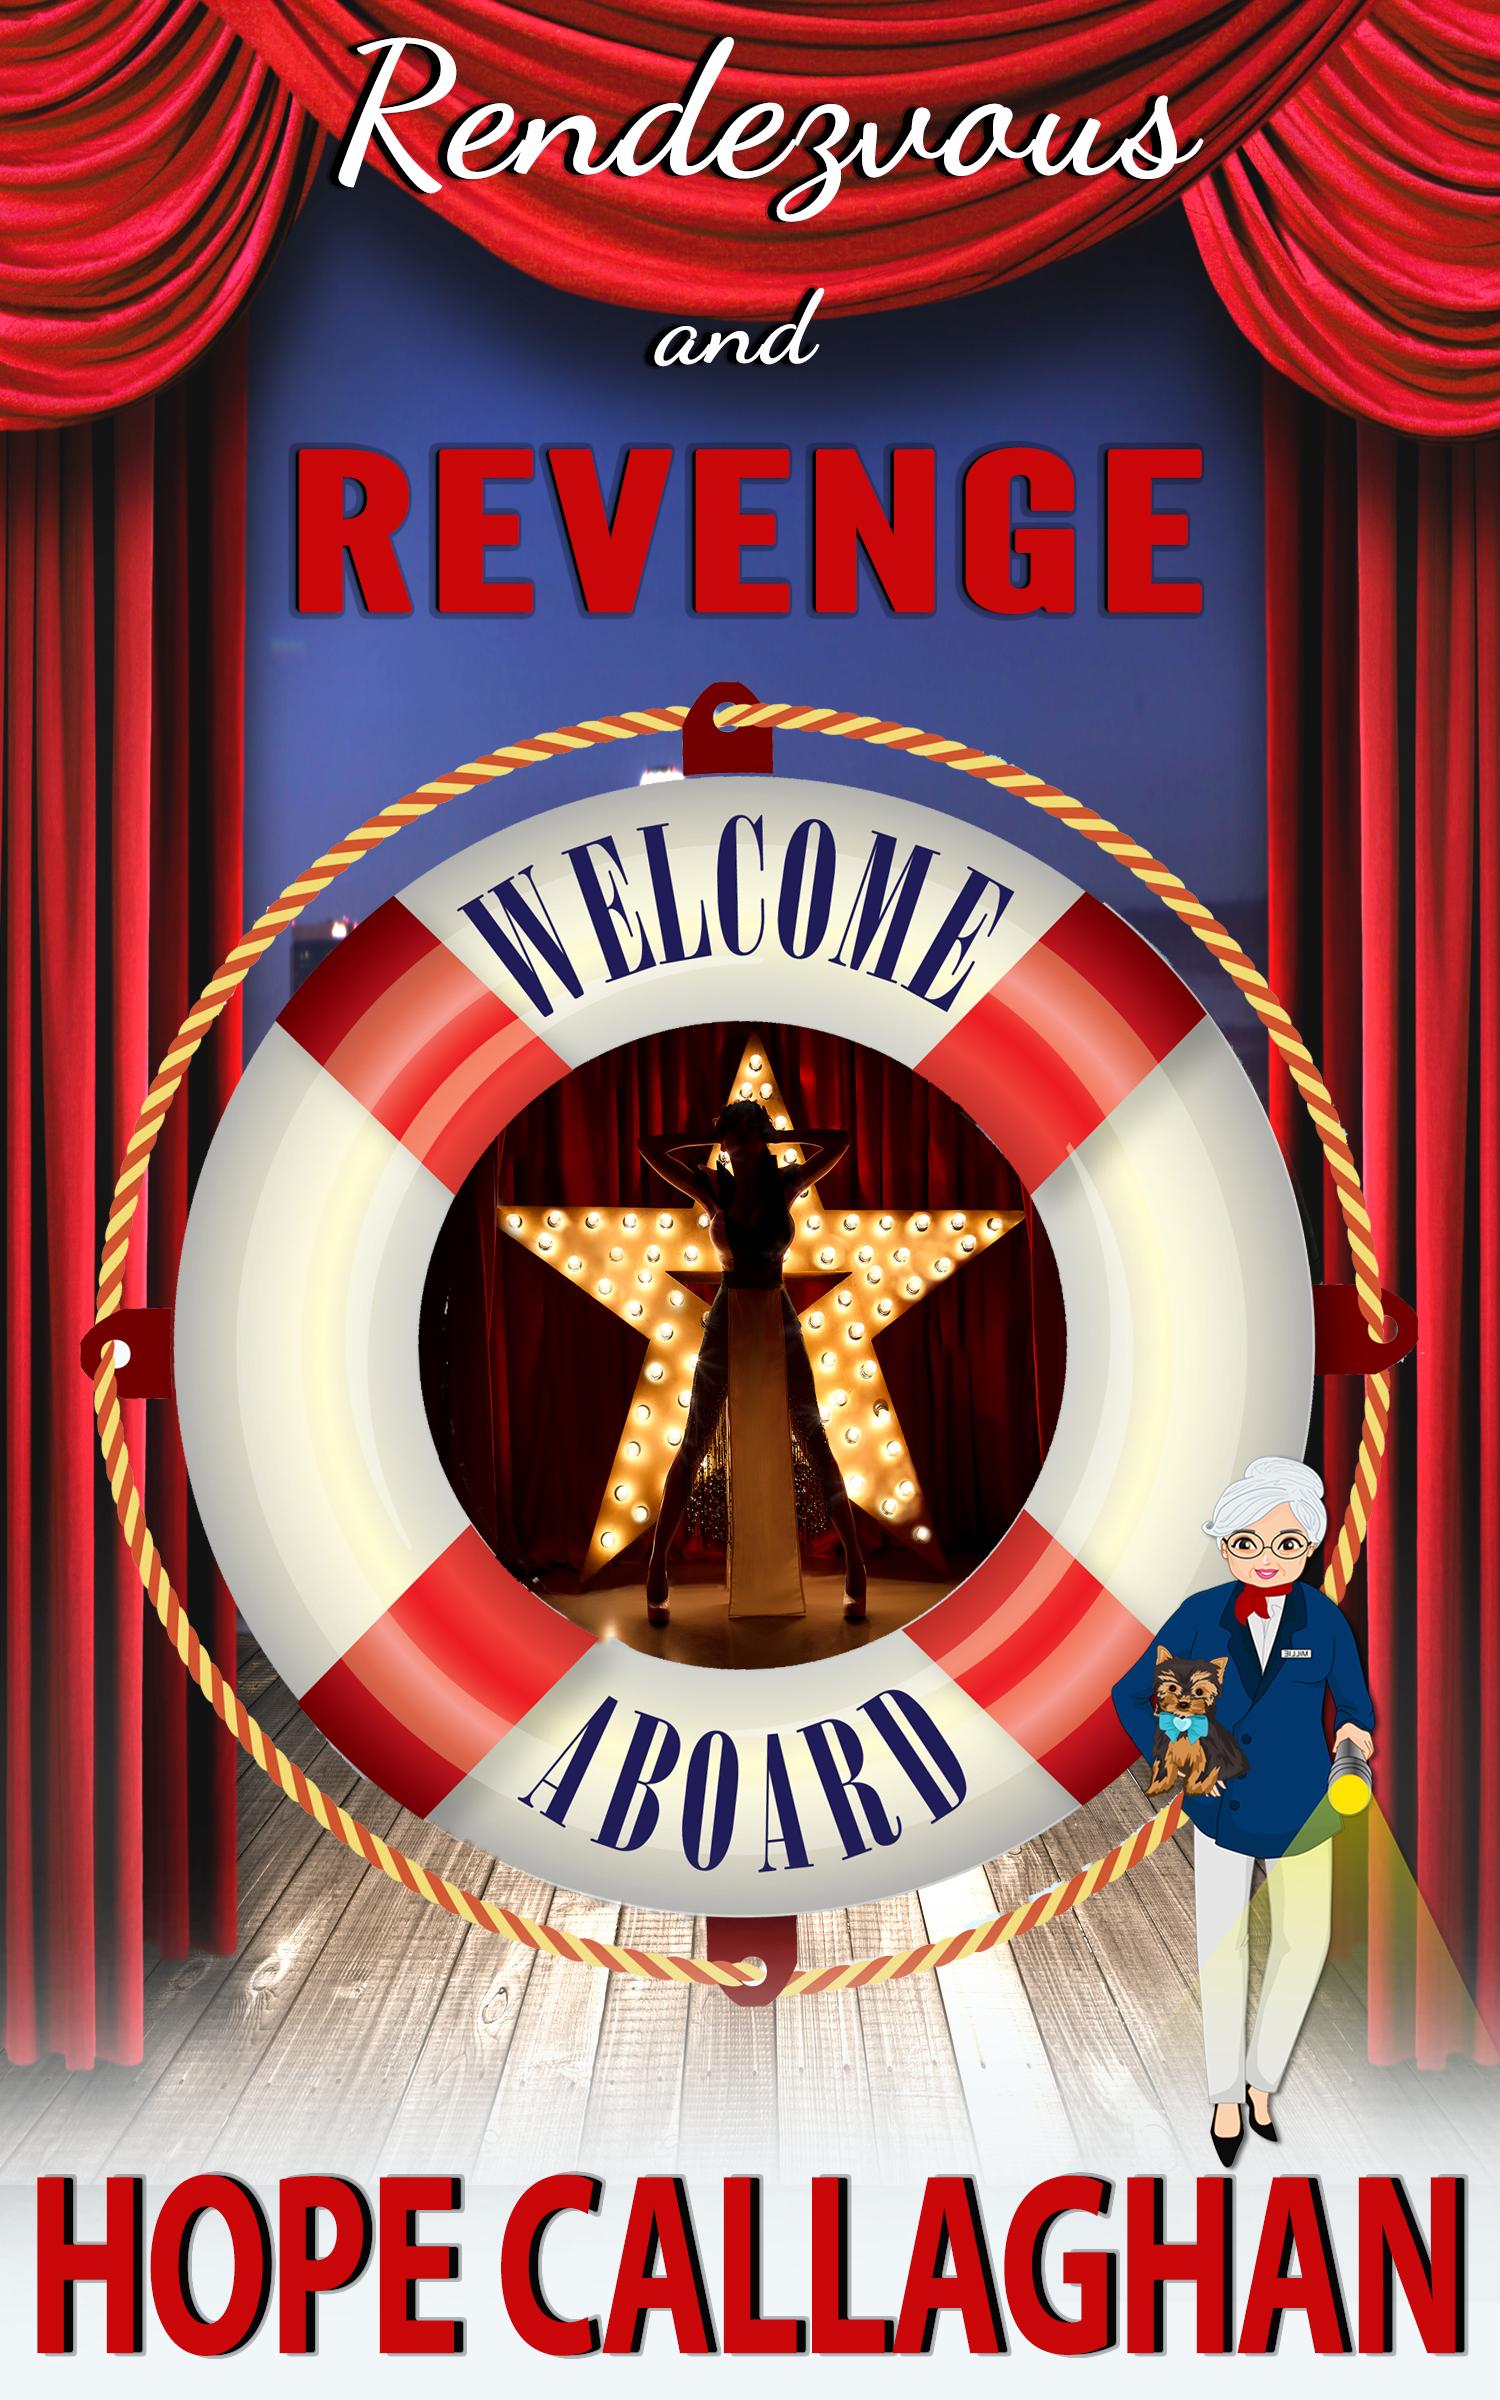 Bargain Mystery    Grab Rendezvous and Revenge While It's One Sale  Was $4.99  - On Sale Now Just 99¢